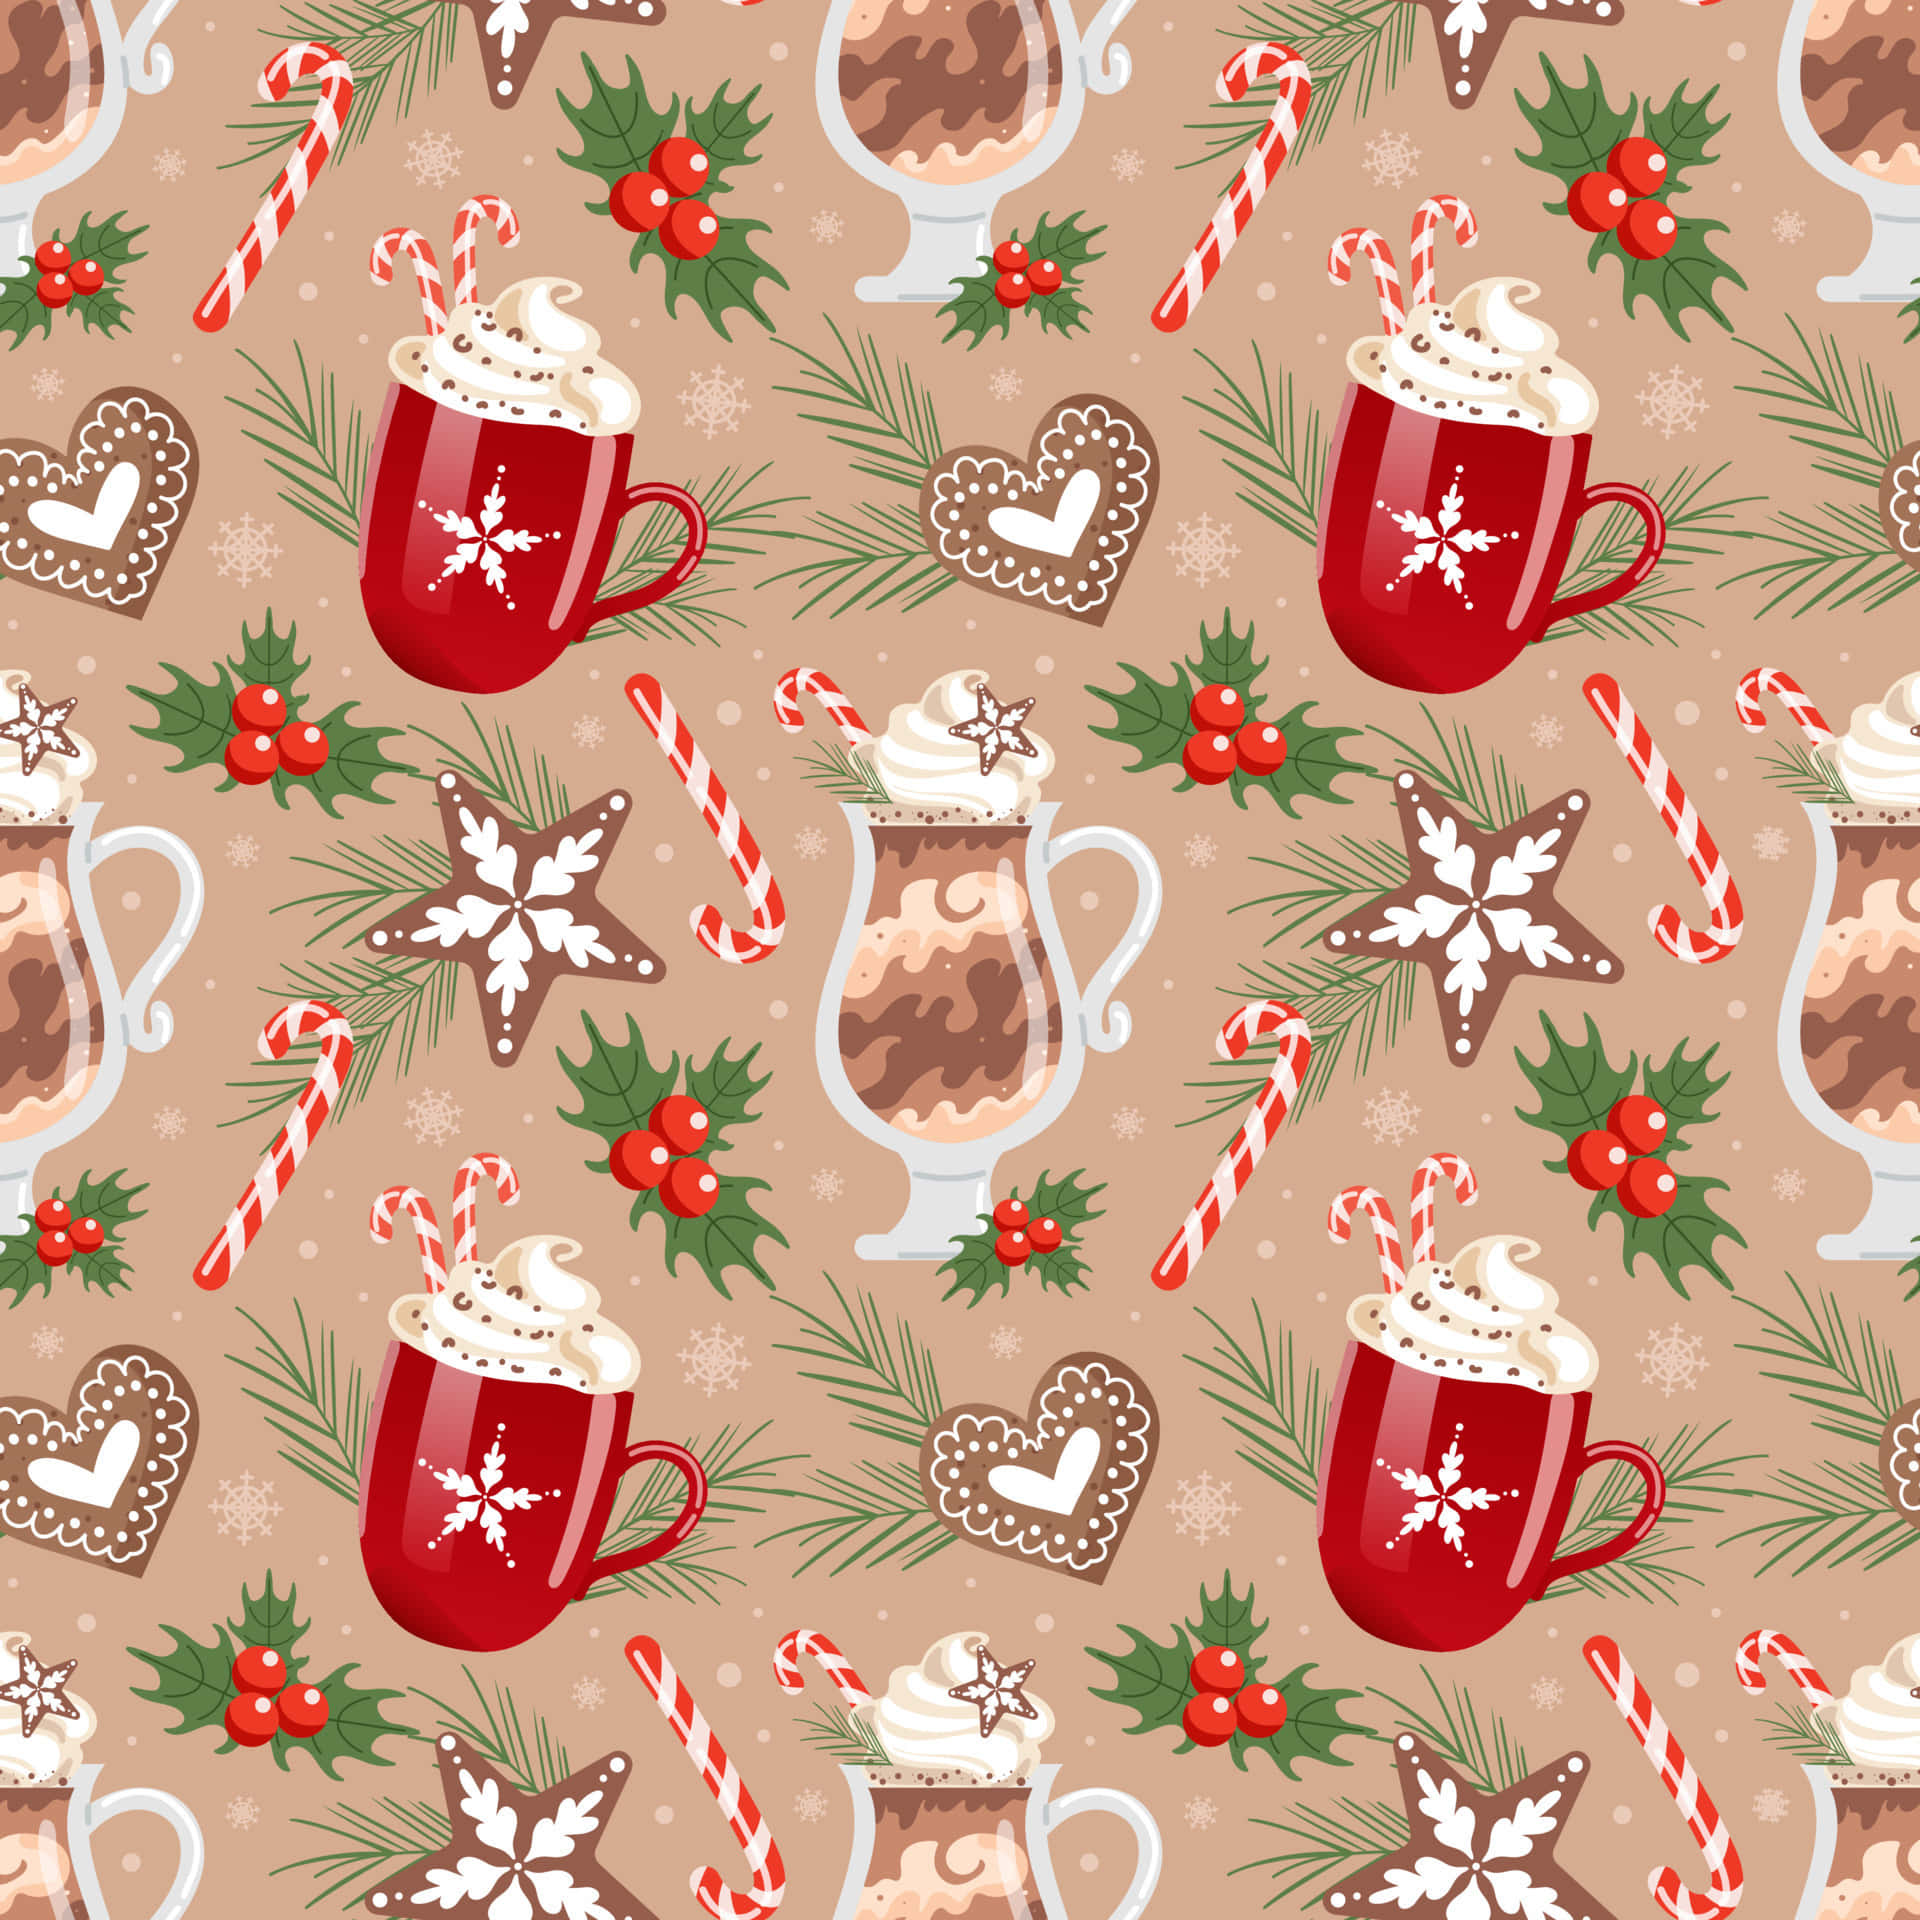 Delicious Hot Chocolate with Whipped Cream and Cocoa Powder Wallpaper